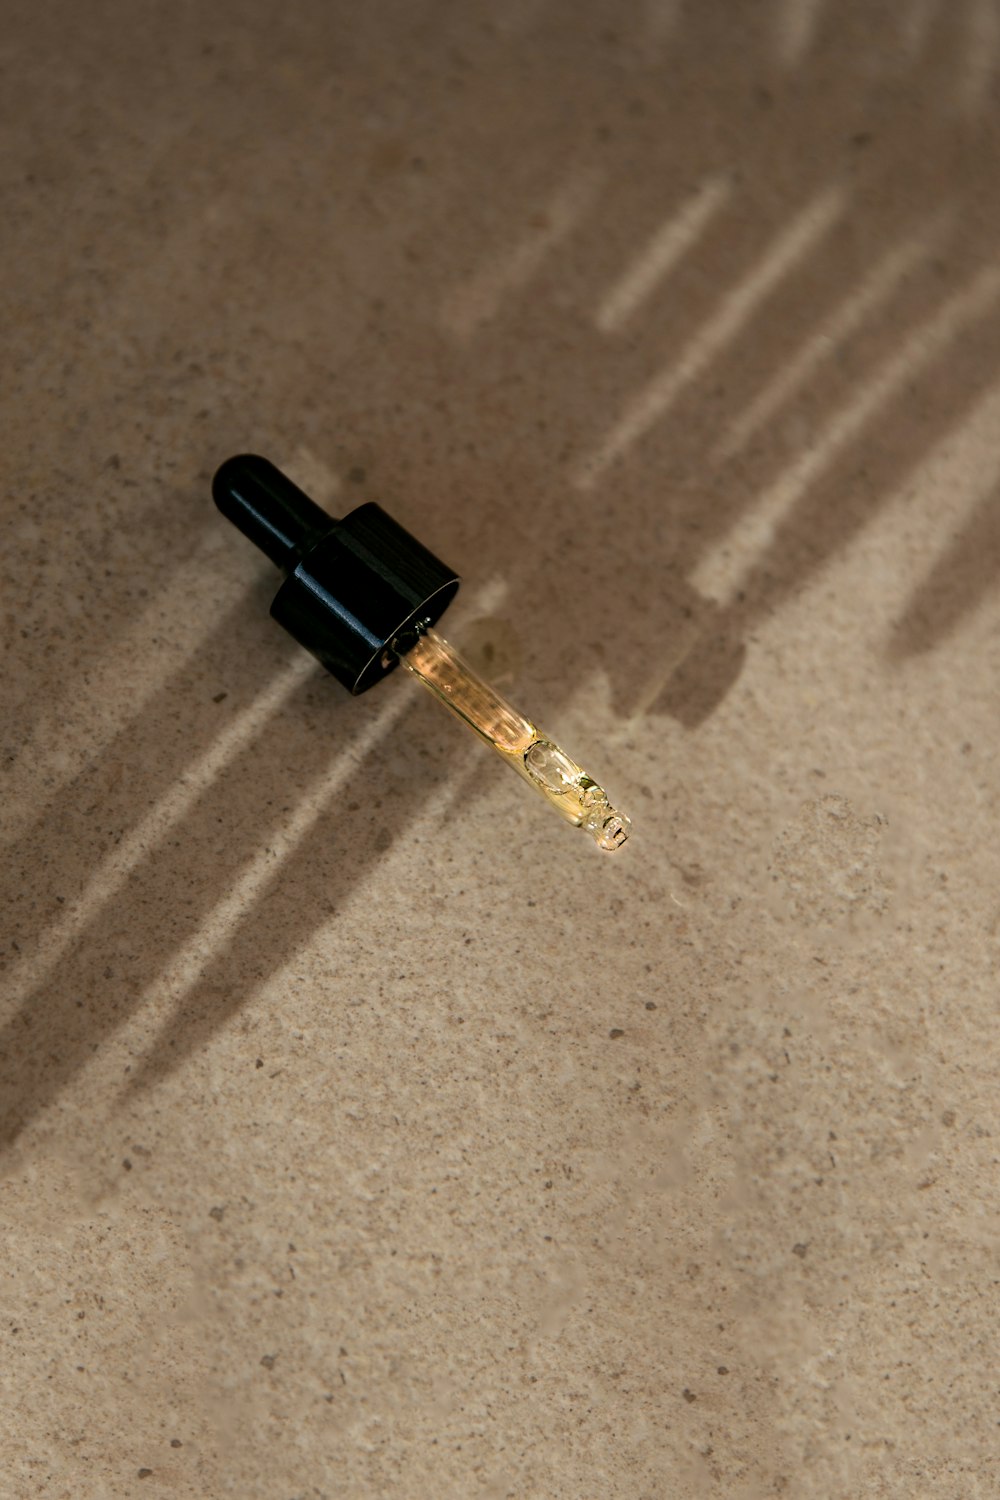 a small black object with a long shadow on the ground